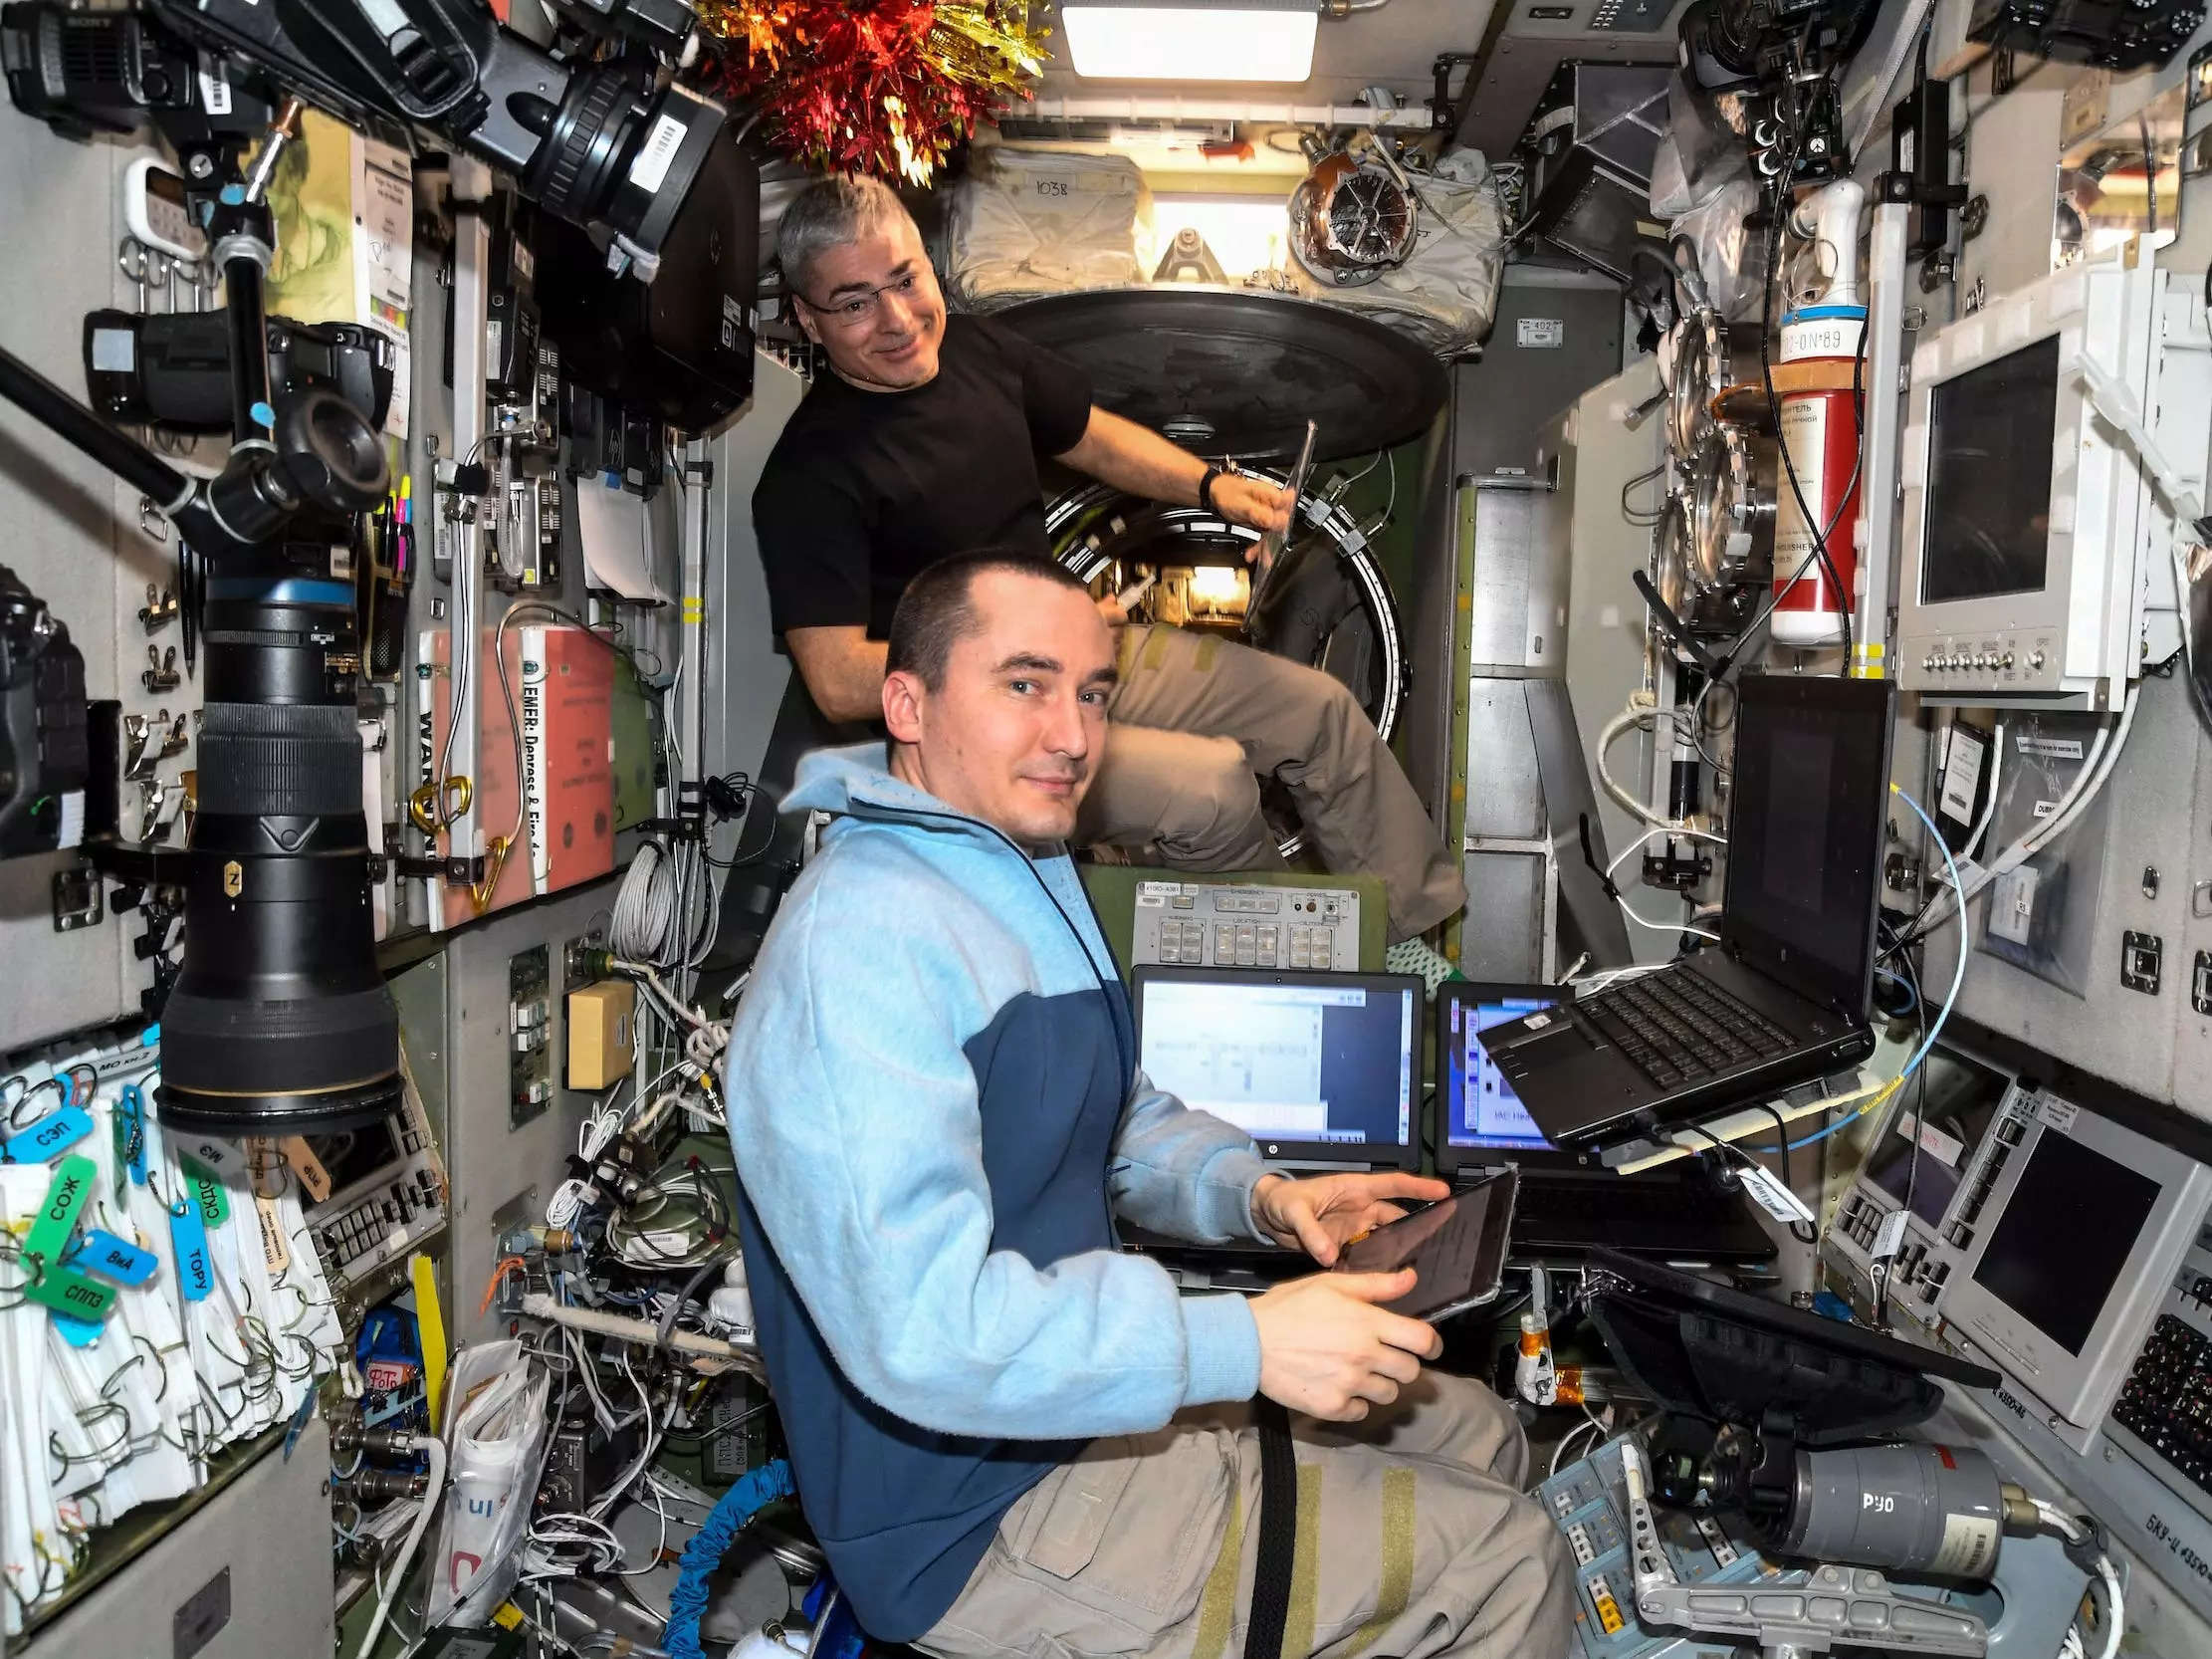 astronaut mark vande hei and cosmonaut pyotr dubrov use computer on space station